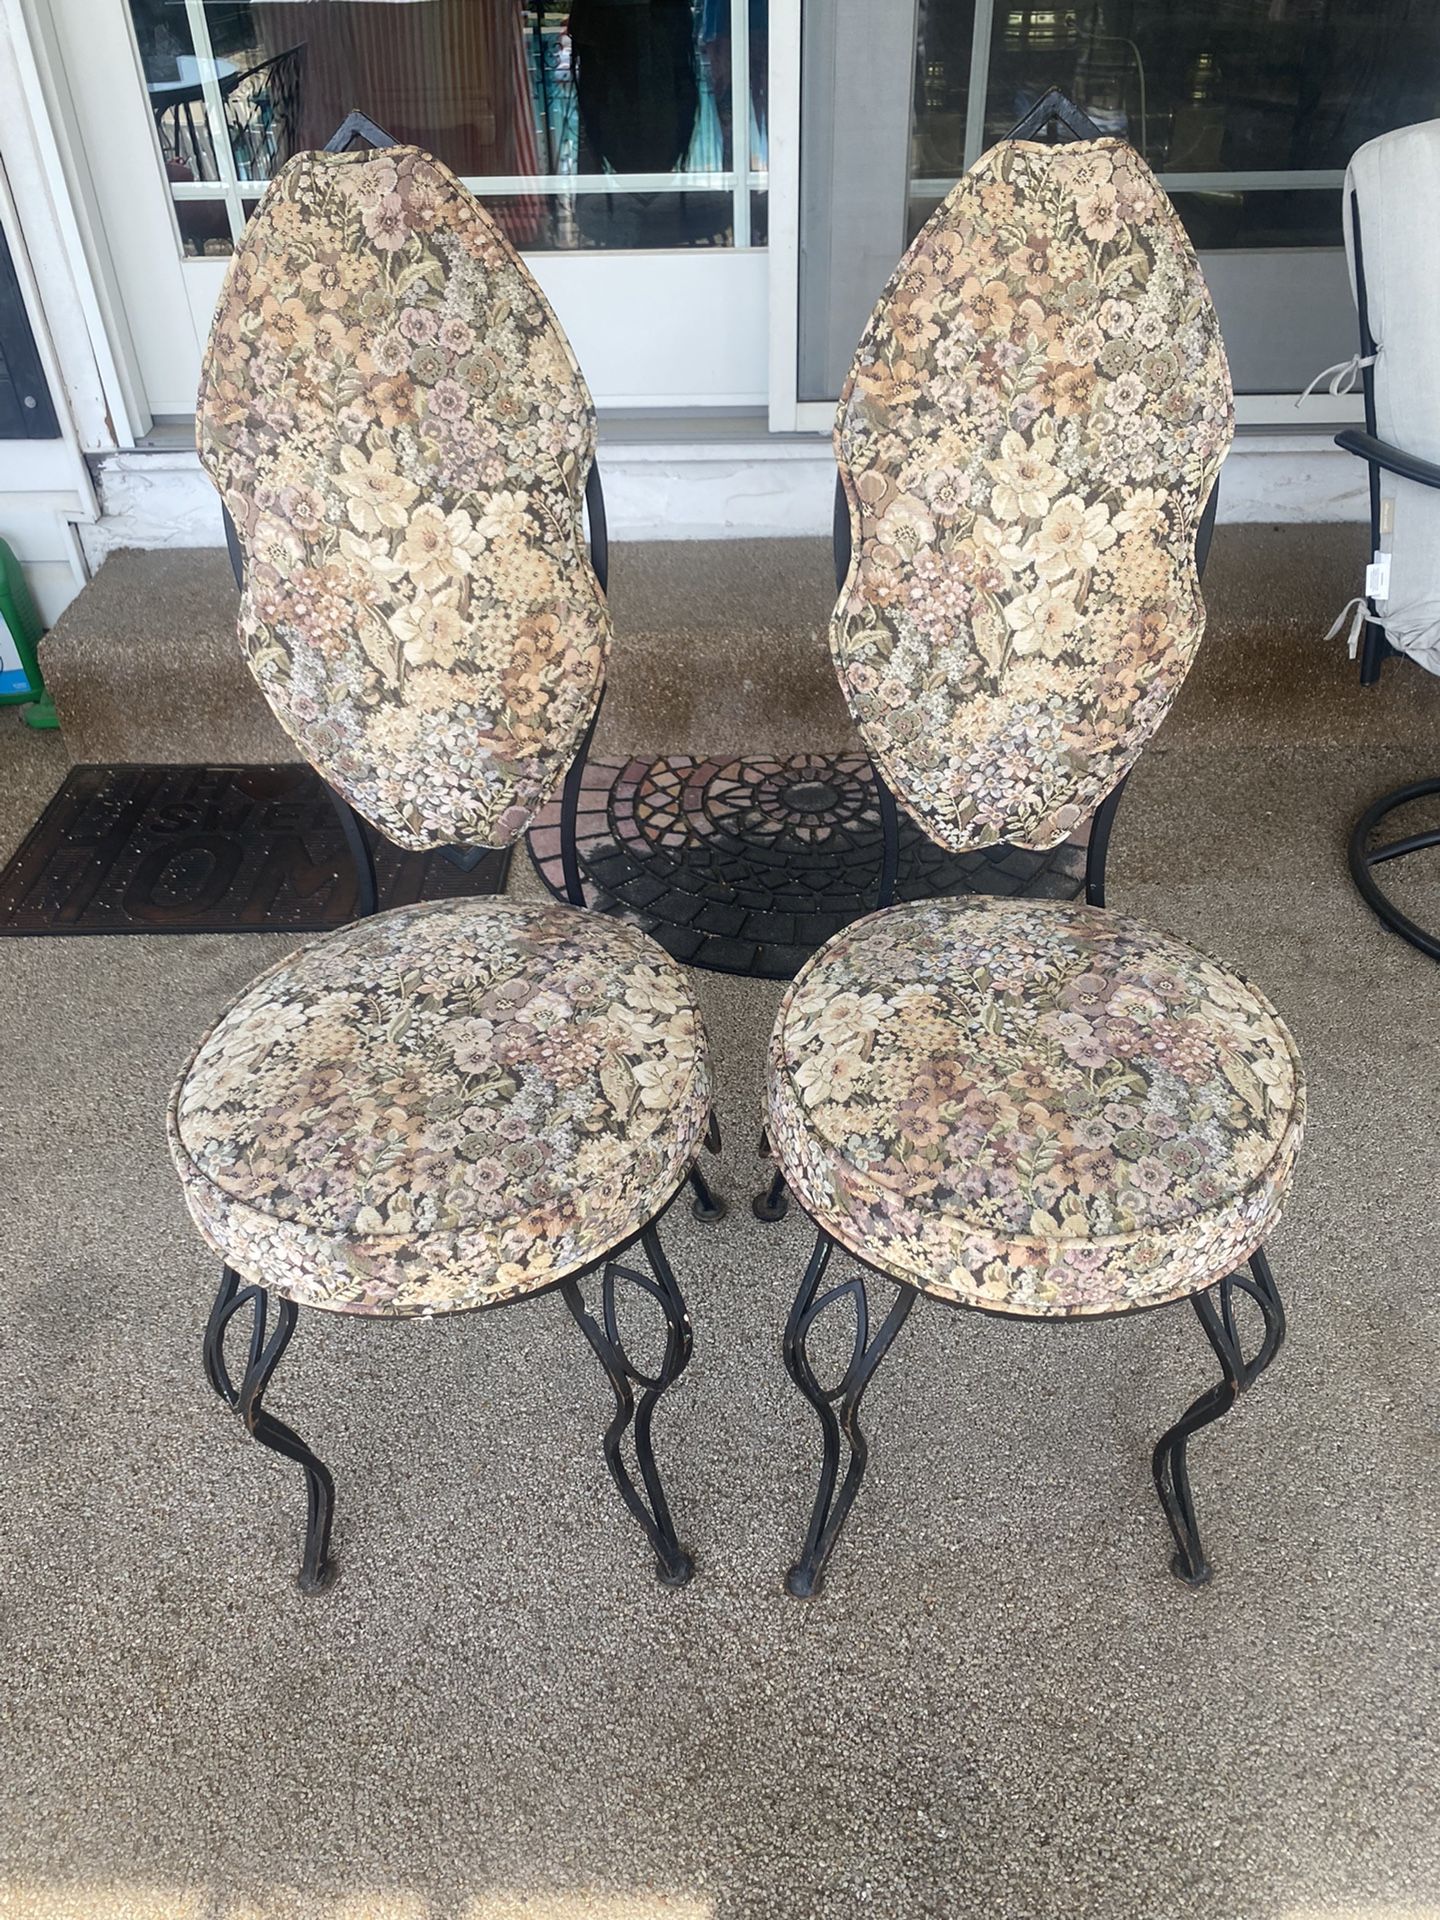 2Wrought Iron Bistro Chairs